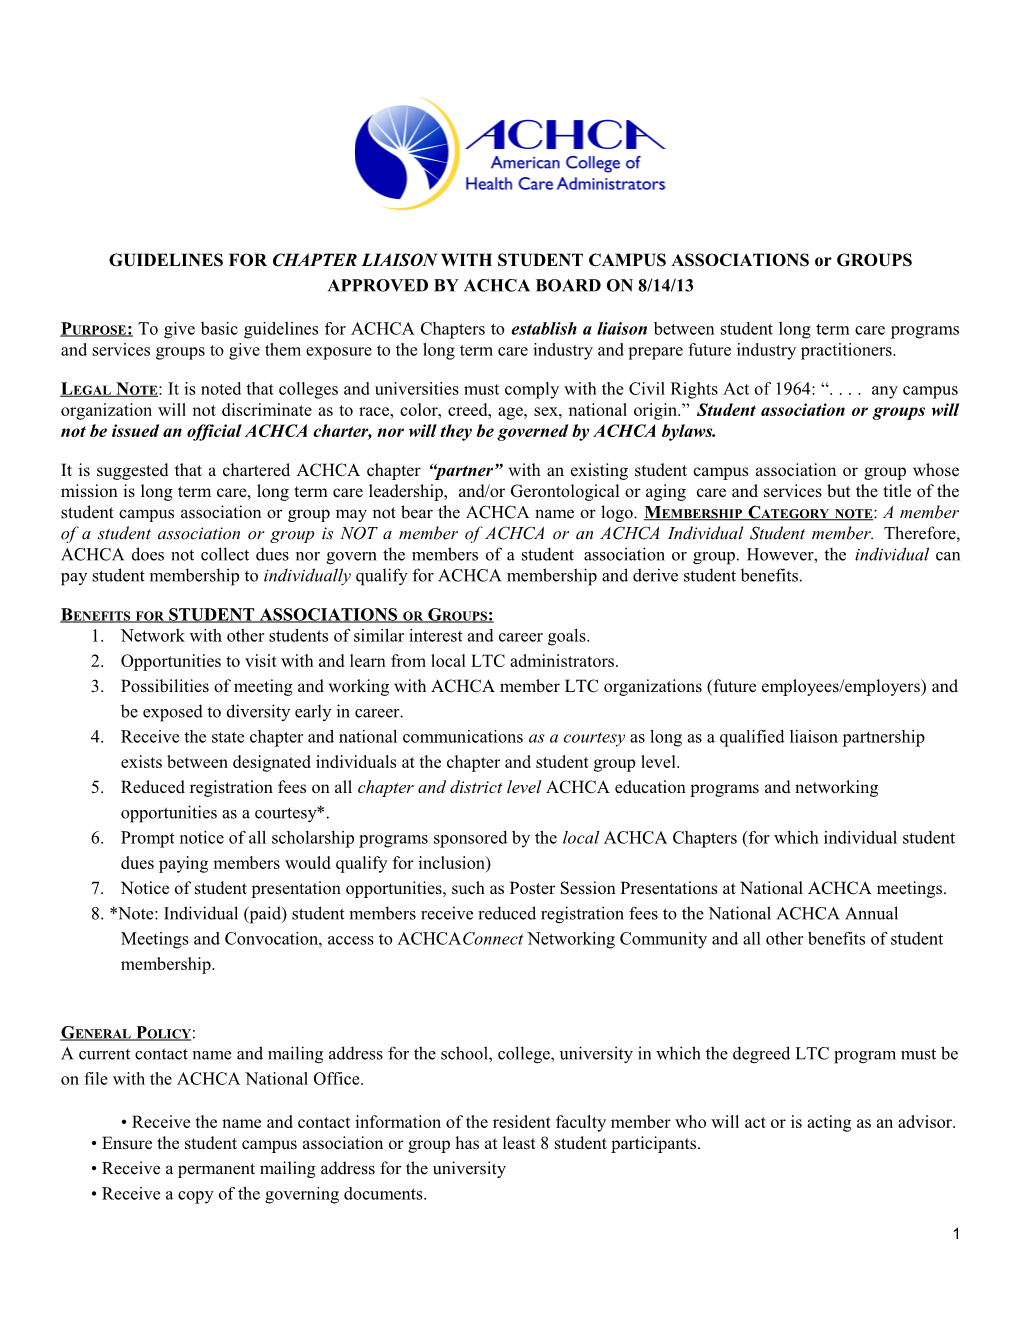 GUIDELINES for CHAPTER LIAISON with STUDENT CAMPUS ASSOCIATIONS Or GROUPS APPROVED BY